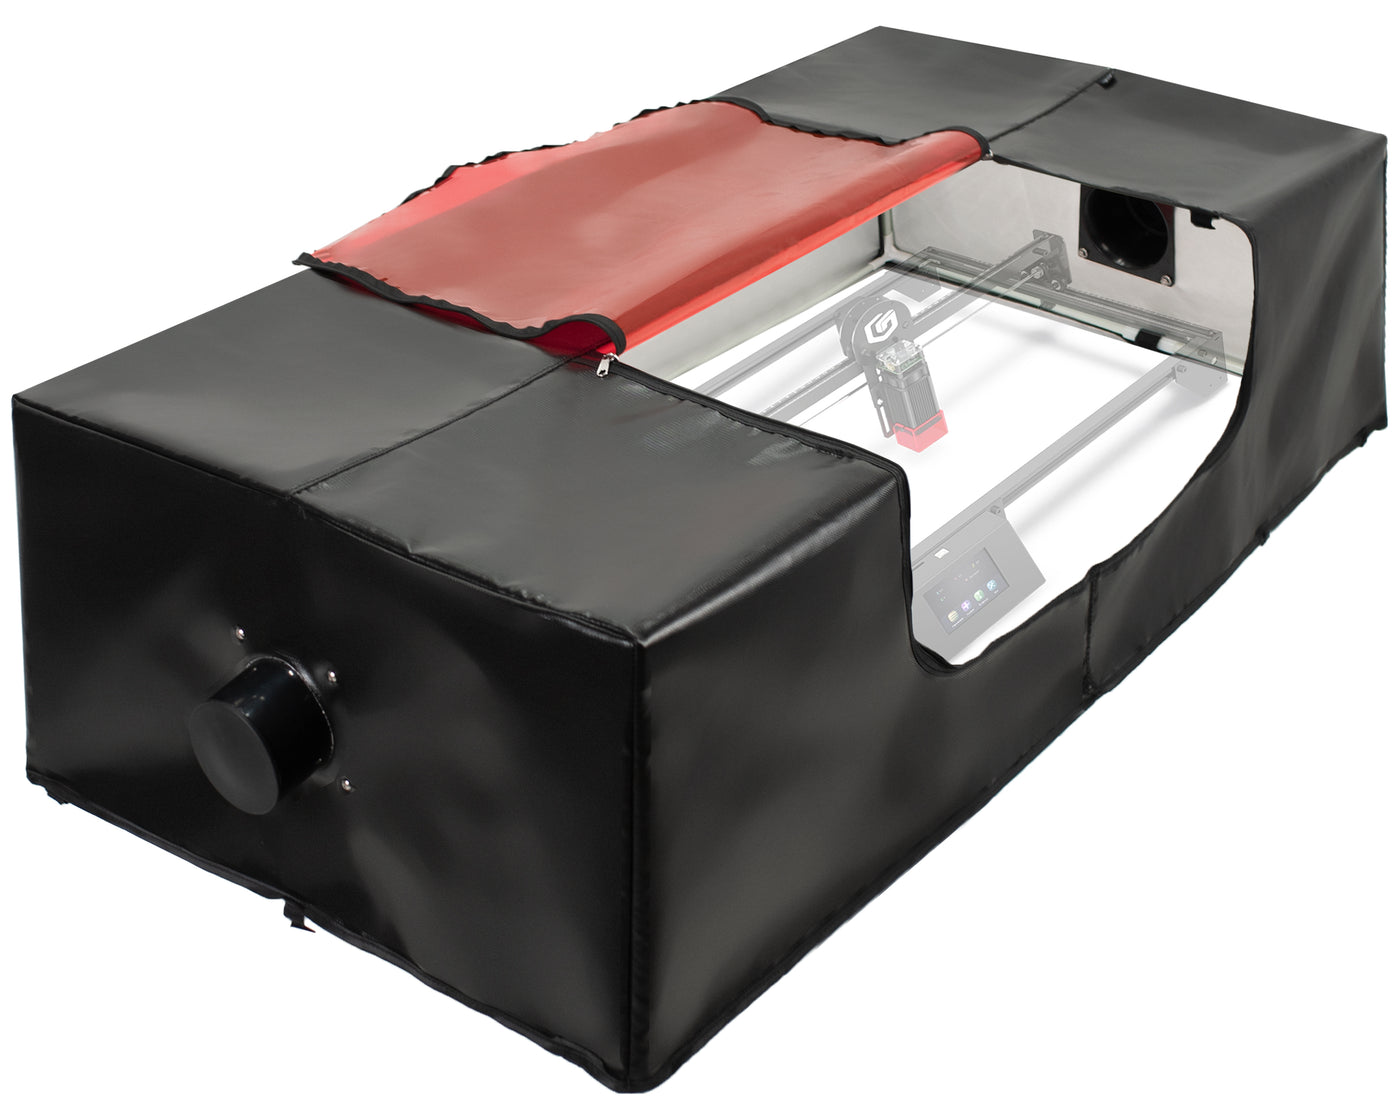 Protective cover designed for extra large engravers and diode laser extension kits that accommodates a variety of engraving projects.